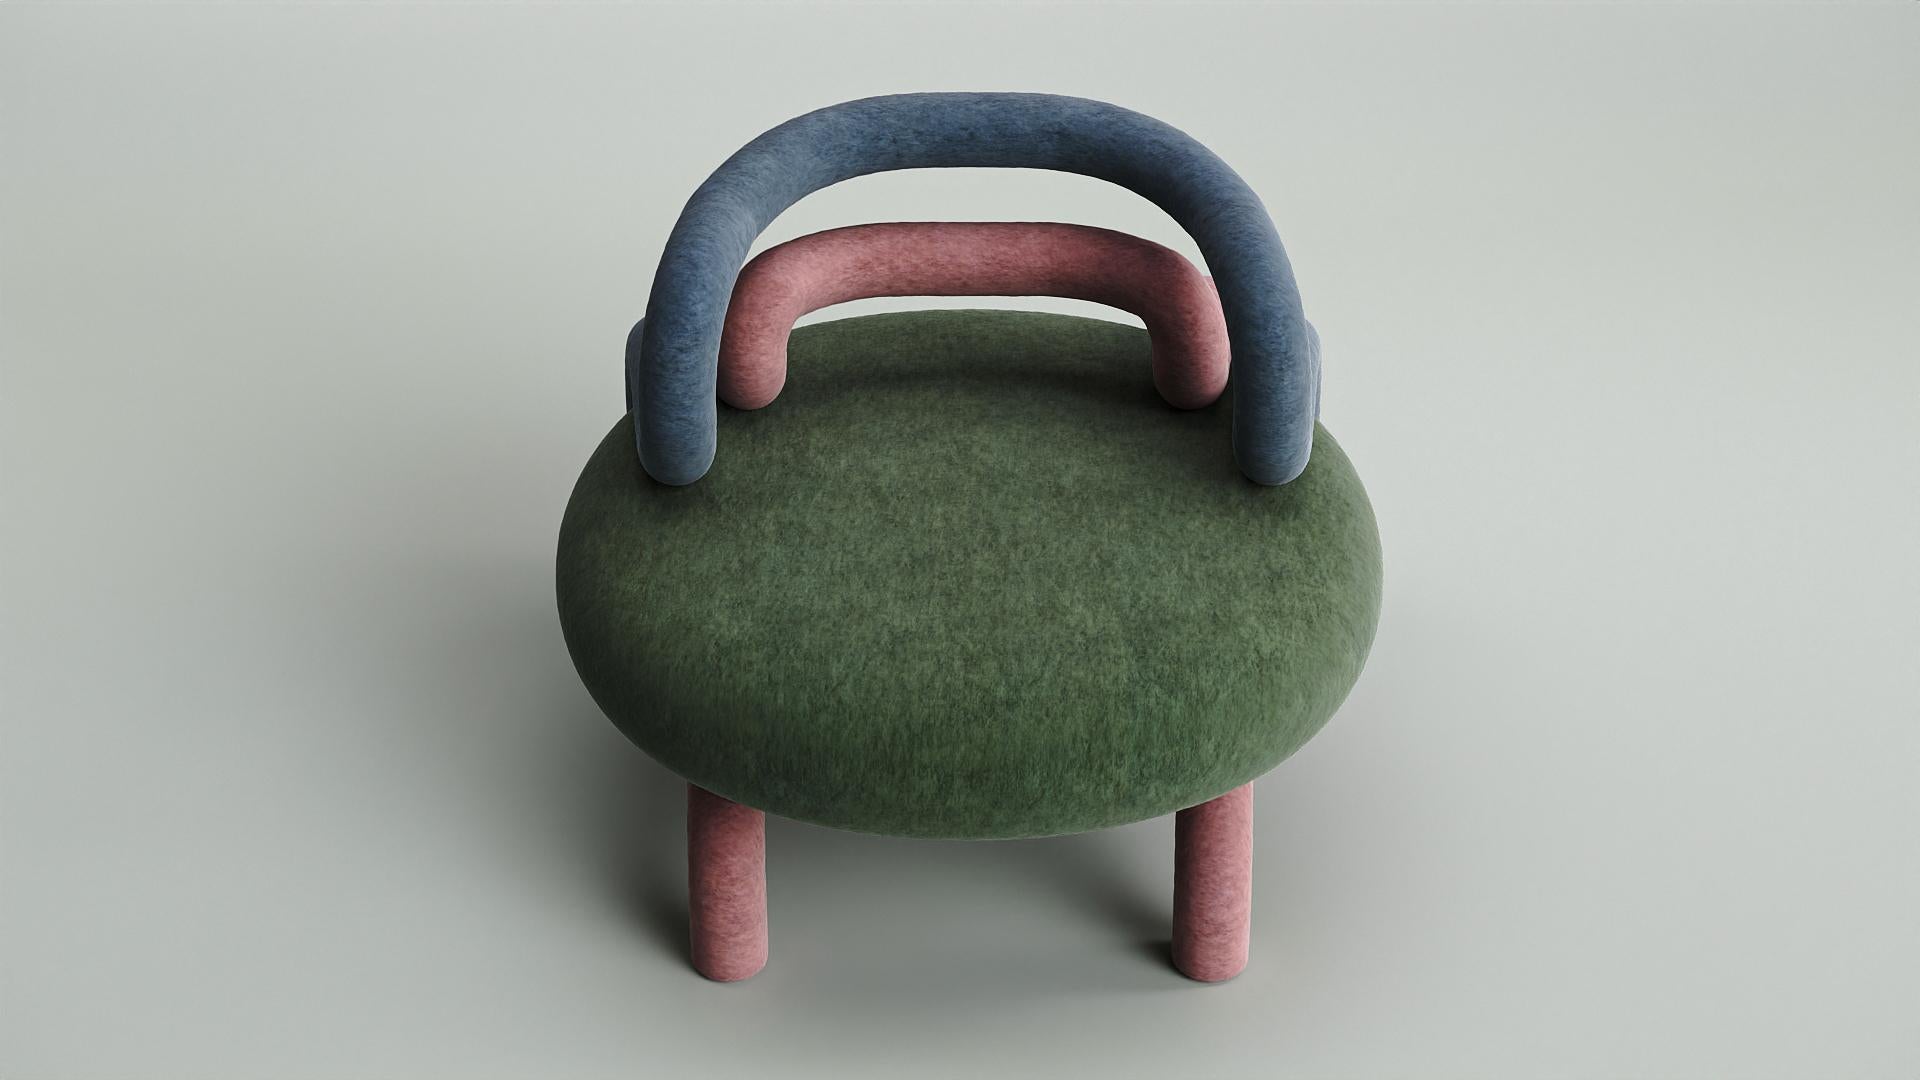 Chloroplast Contemporary armchair by Taras Zheltyshev 
Dimensions: 69 x 78 x 78 cm
69 x 78 x 78 cm

The Chloroplast chair is an interior item that recreates one of the most important plant cells in a playful form. Chloroplast performs the